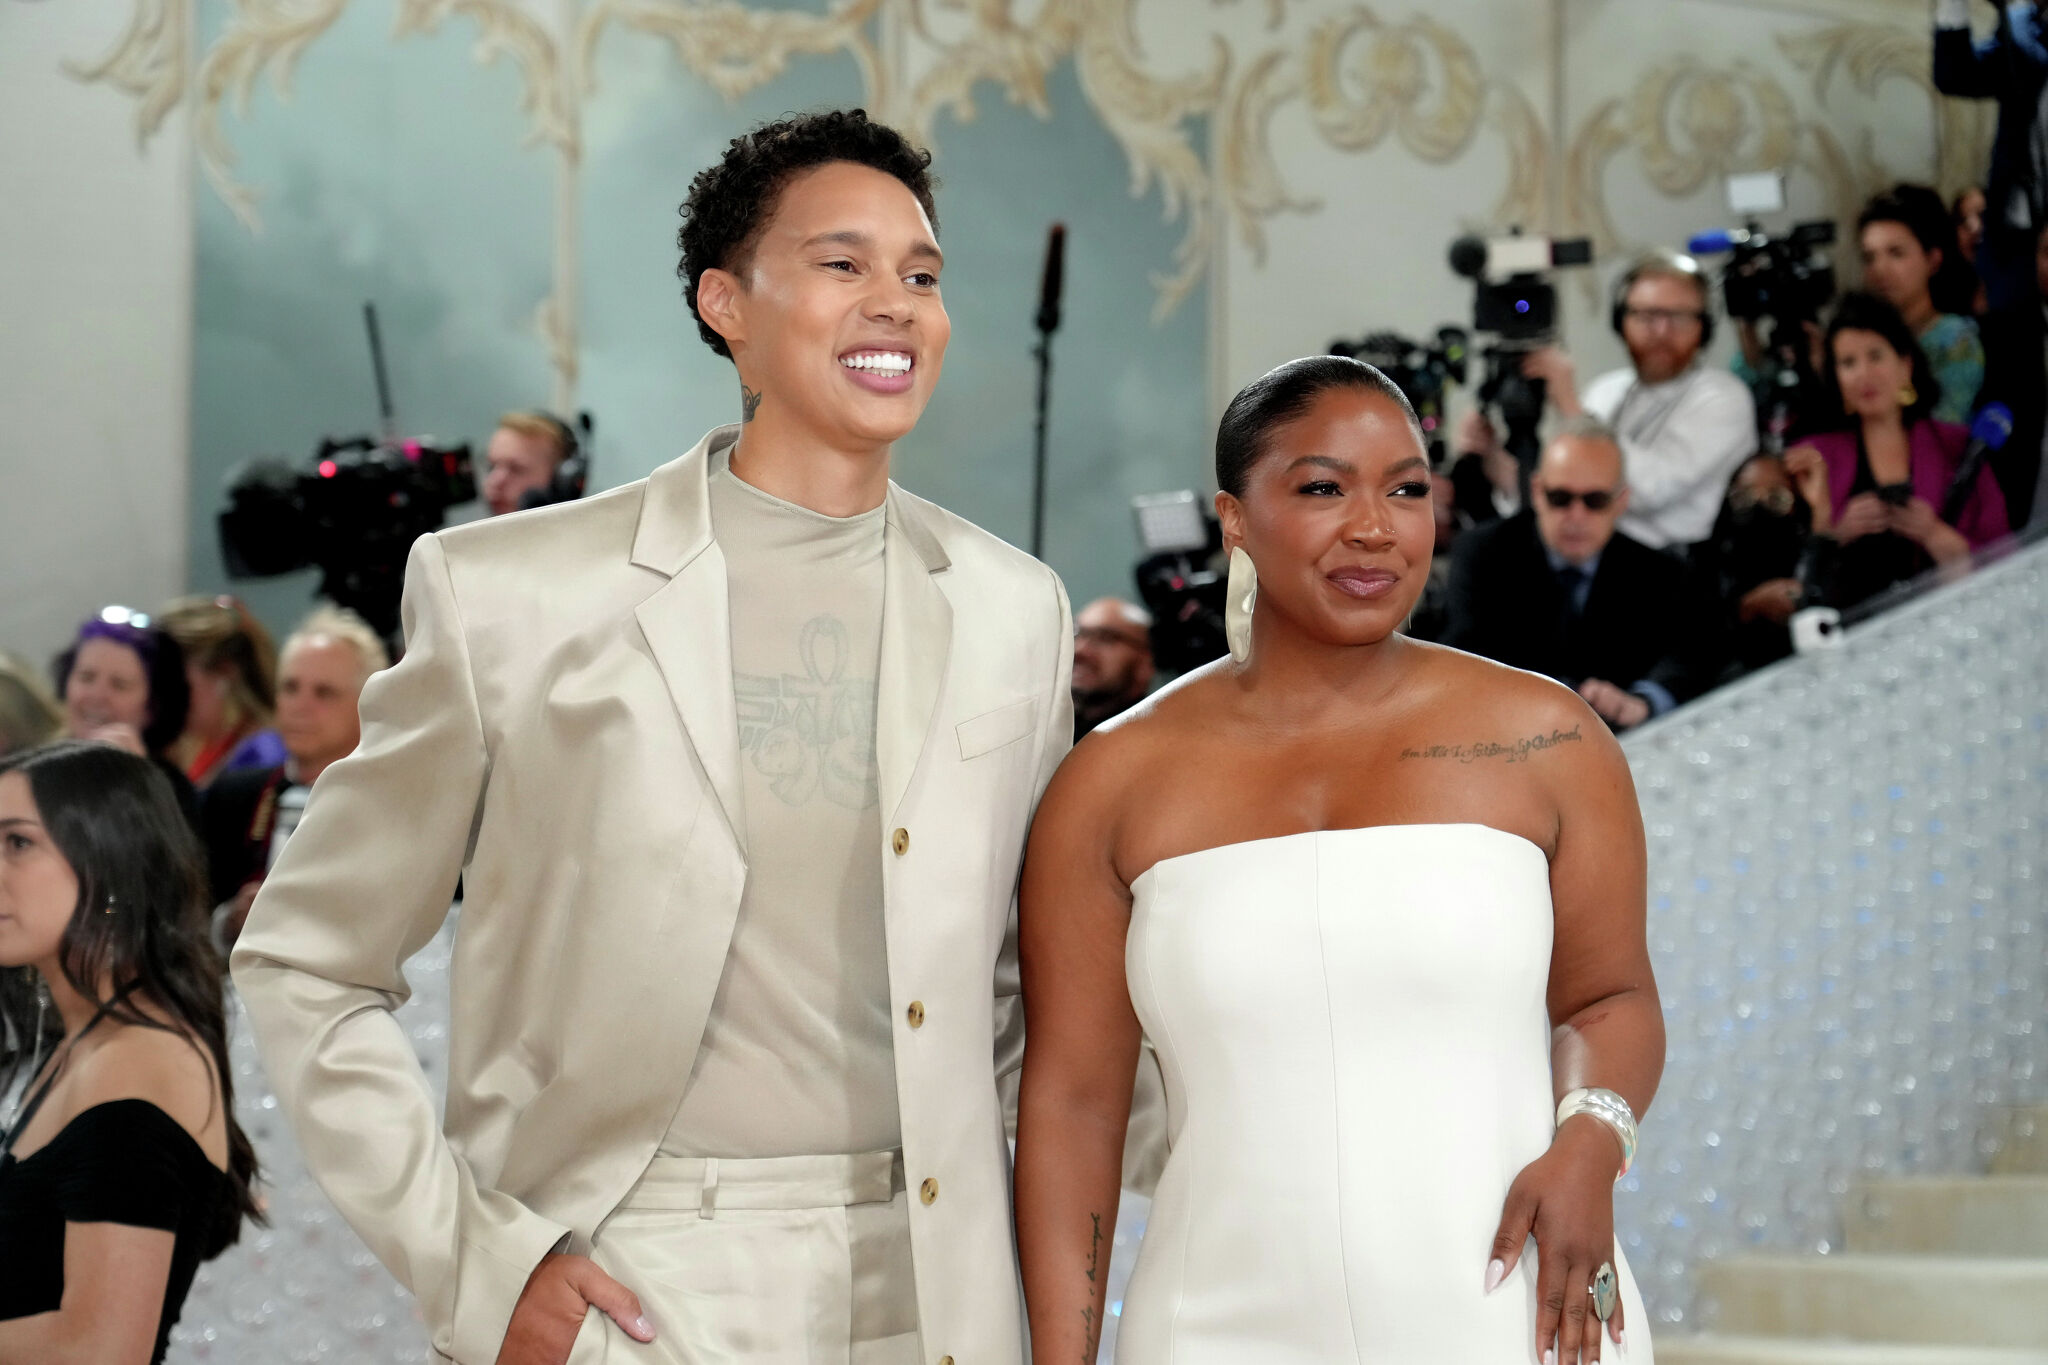 Brittney Griner and Wife Cherelle Make Their Met Gala Debut